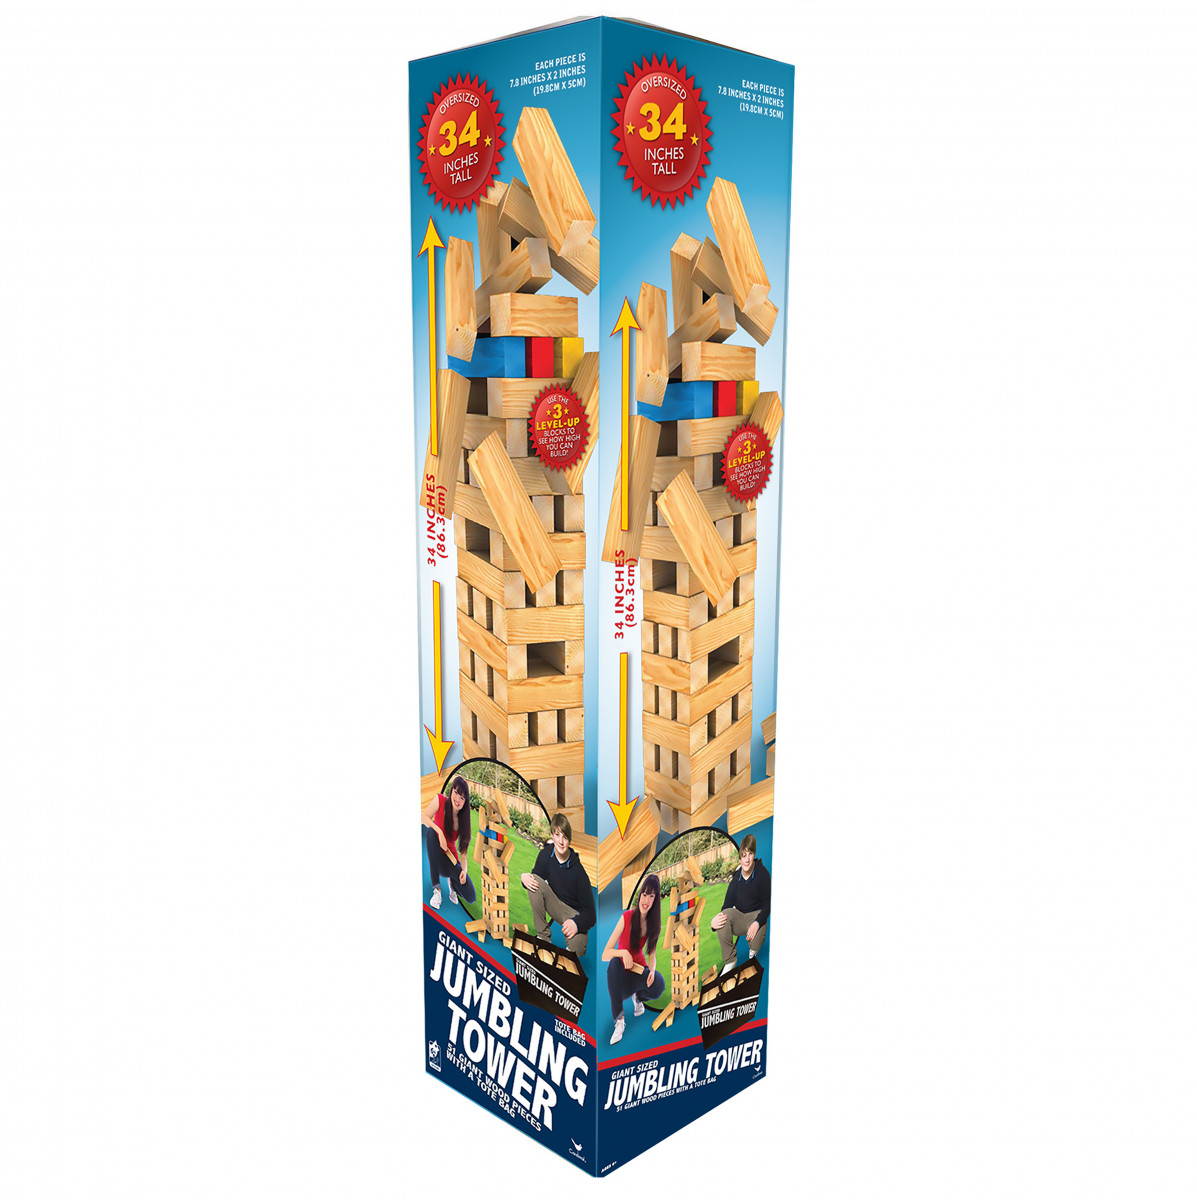 Alea's Deals Giant Wood Jumbling Tower $35.00 *Black Friday Price*  